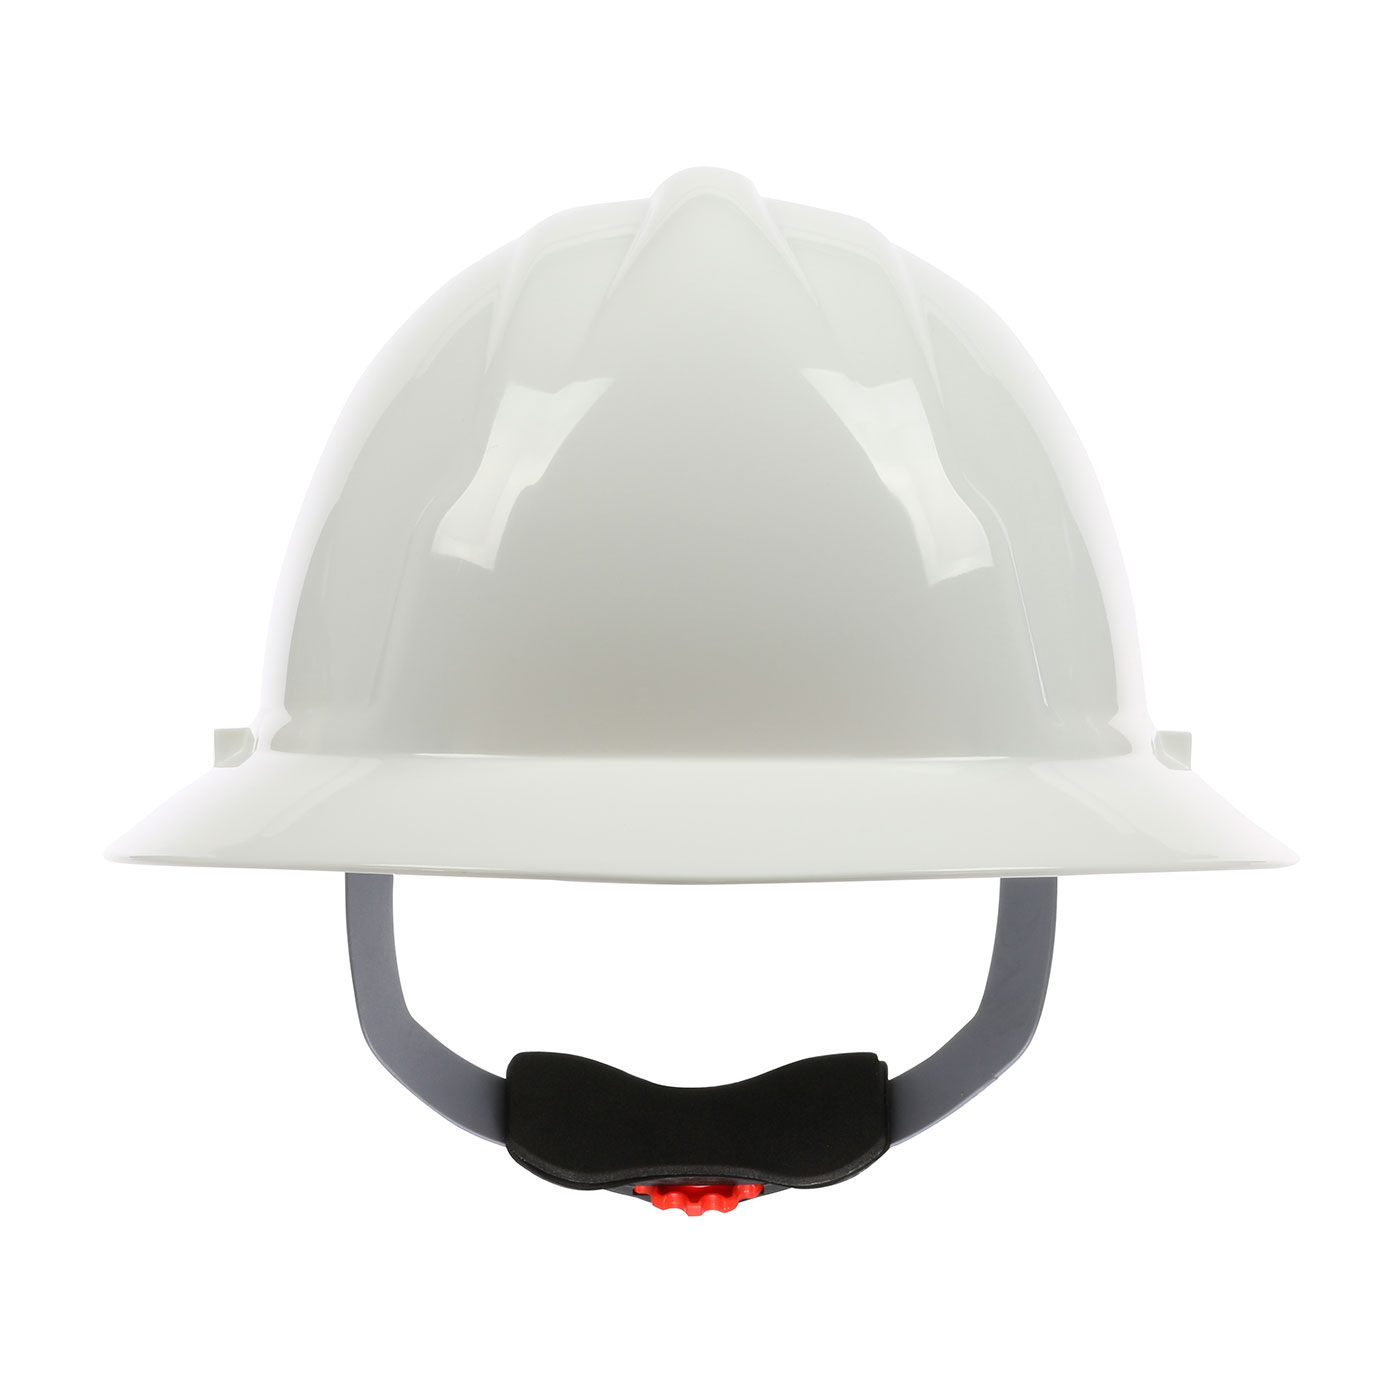 PIP 280-FBW4200-10 4200 Series Full Brim White Hard Hat with HDPE Shell, 4-Point Polyester Suspension and Wheel Ratchet Adjustment PID-280FBW420010